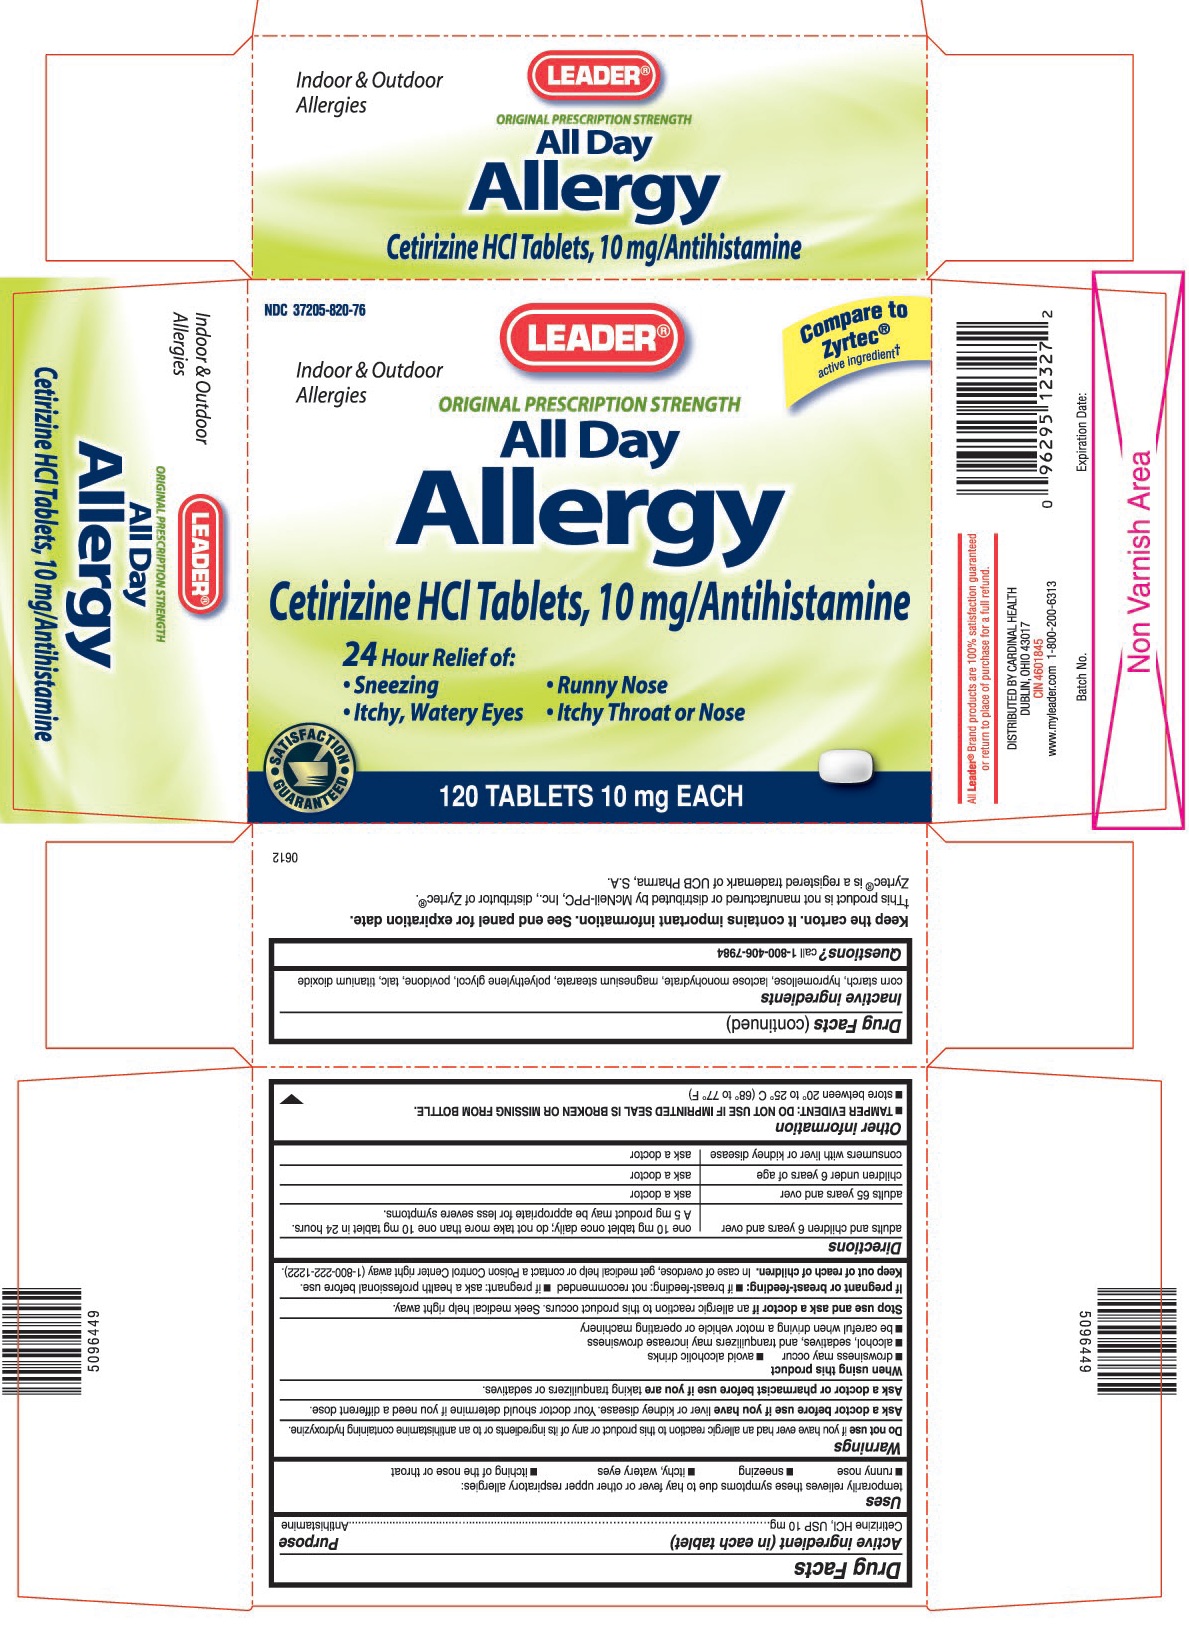 This is the 120 count bottle carton label for Leader Cetirizine HCl tablets.